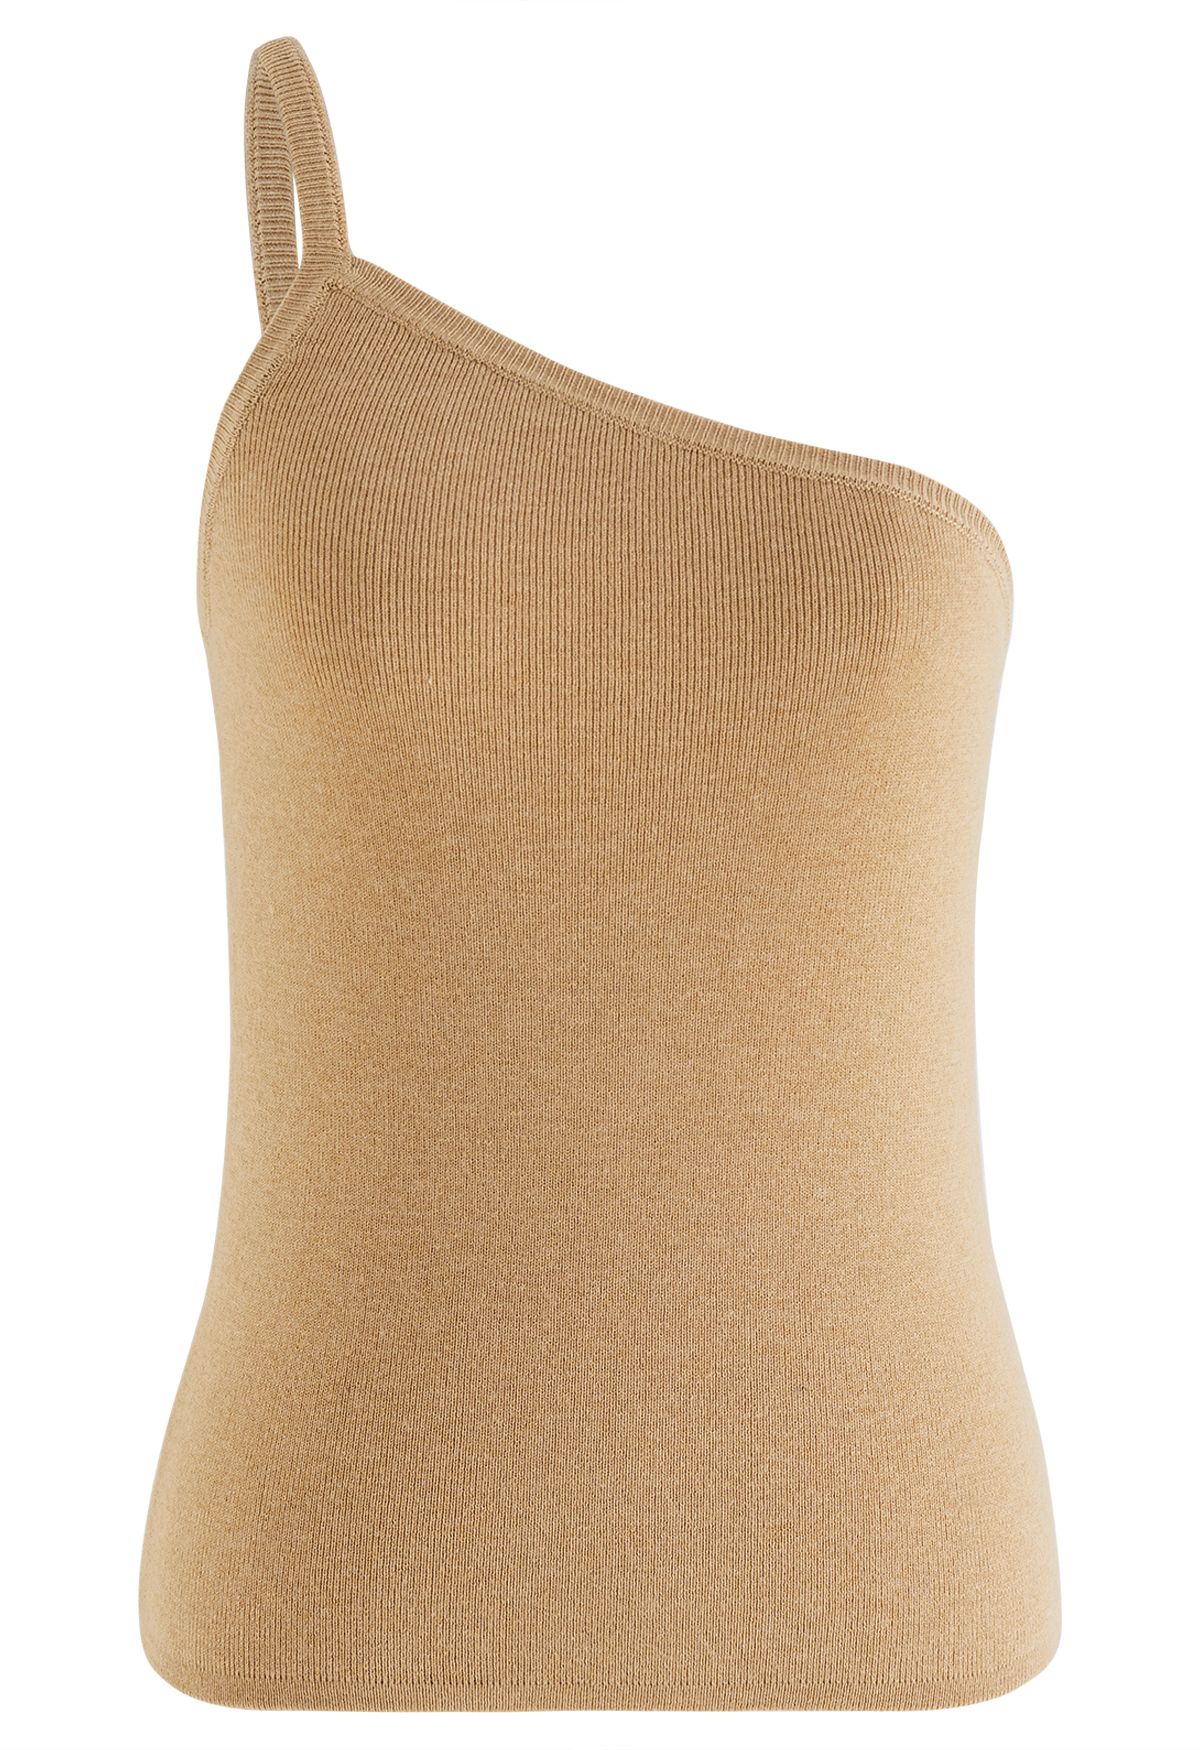 Strappy One-Shoulder Knit Tank Top in Light Tan